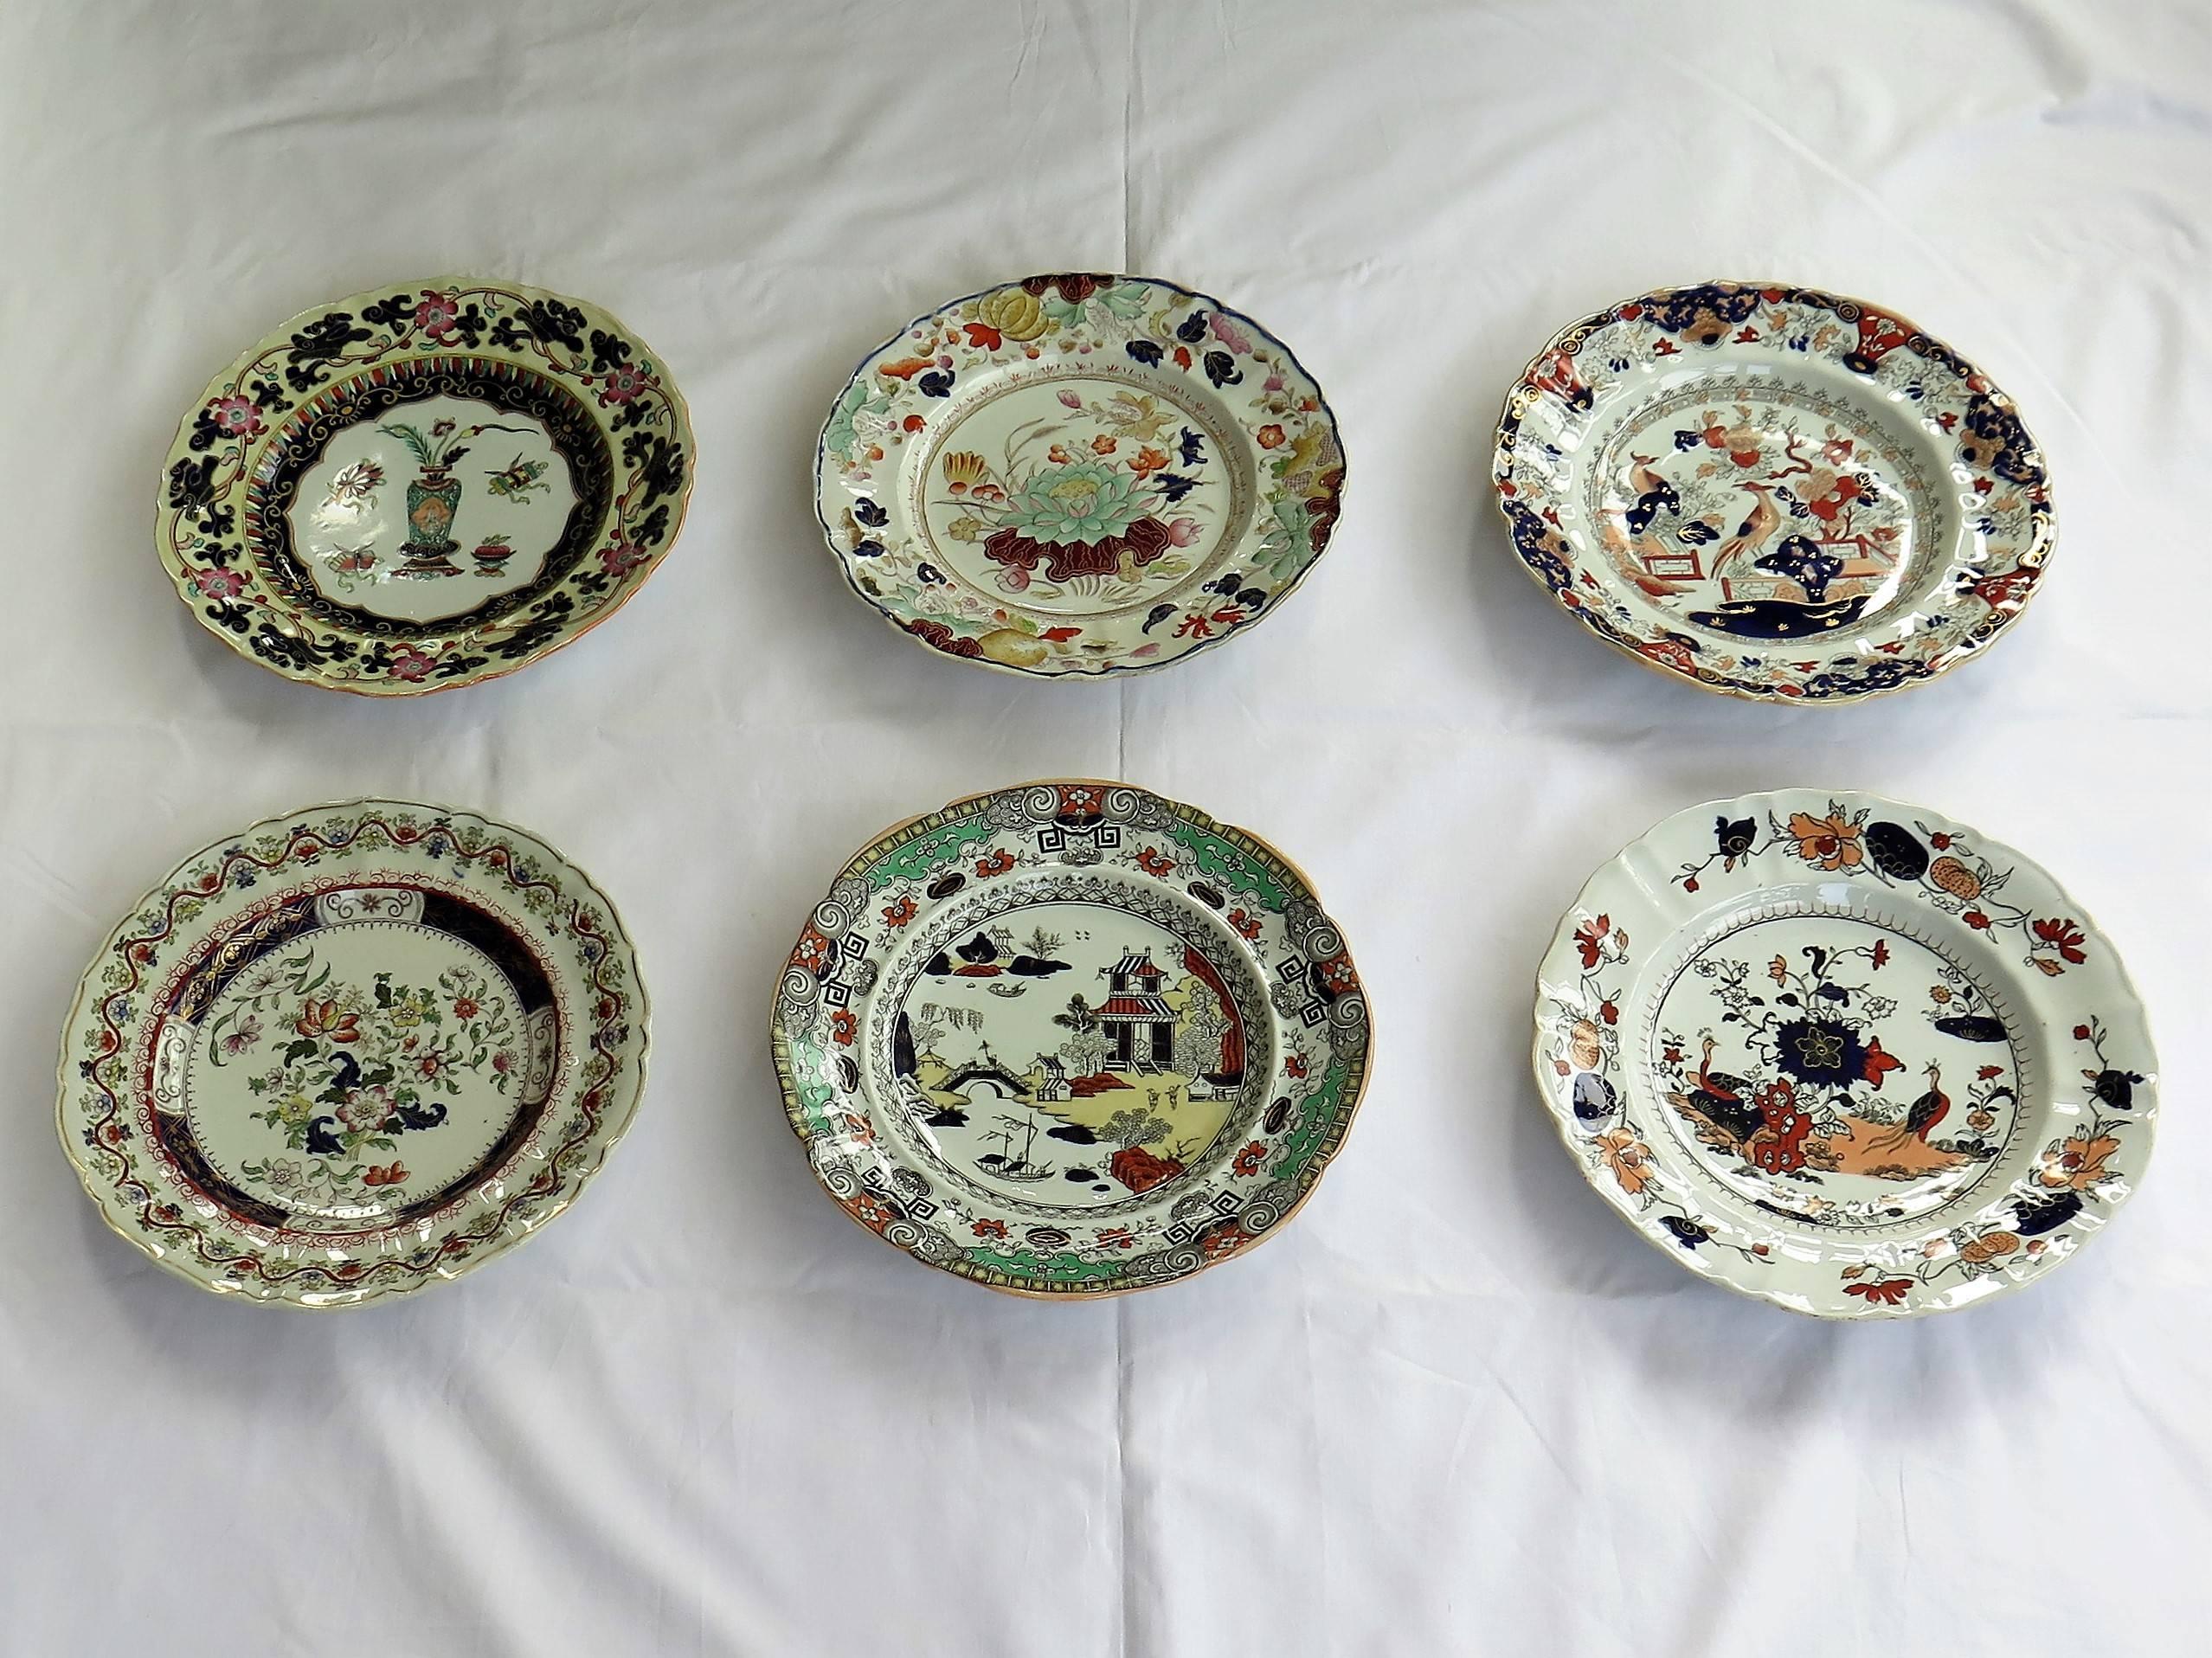 This is a harlequin set of six Mason's ironstone, large dinner plates, all dating to the early to mid-19th century, between 1825-1845.

All the plates have a very similar shape and size with some slight variation in height and diameter, with